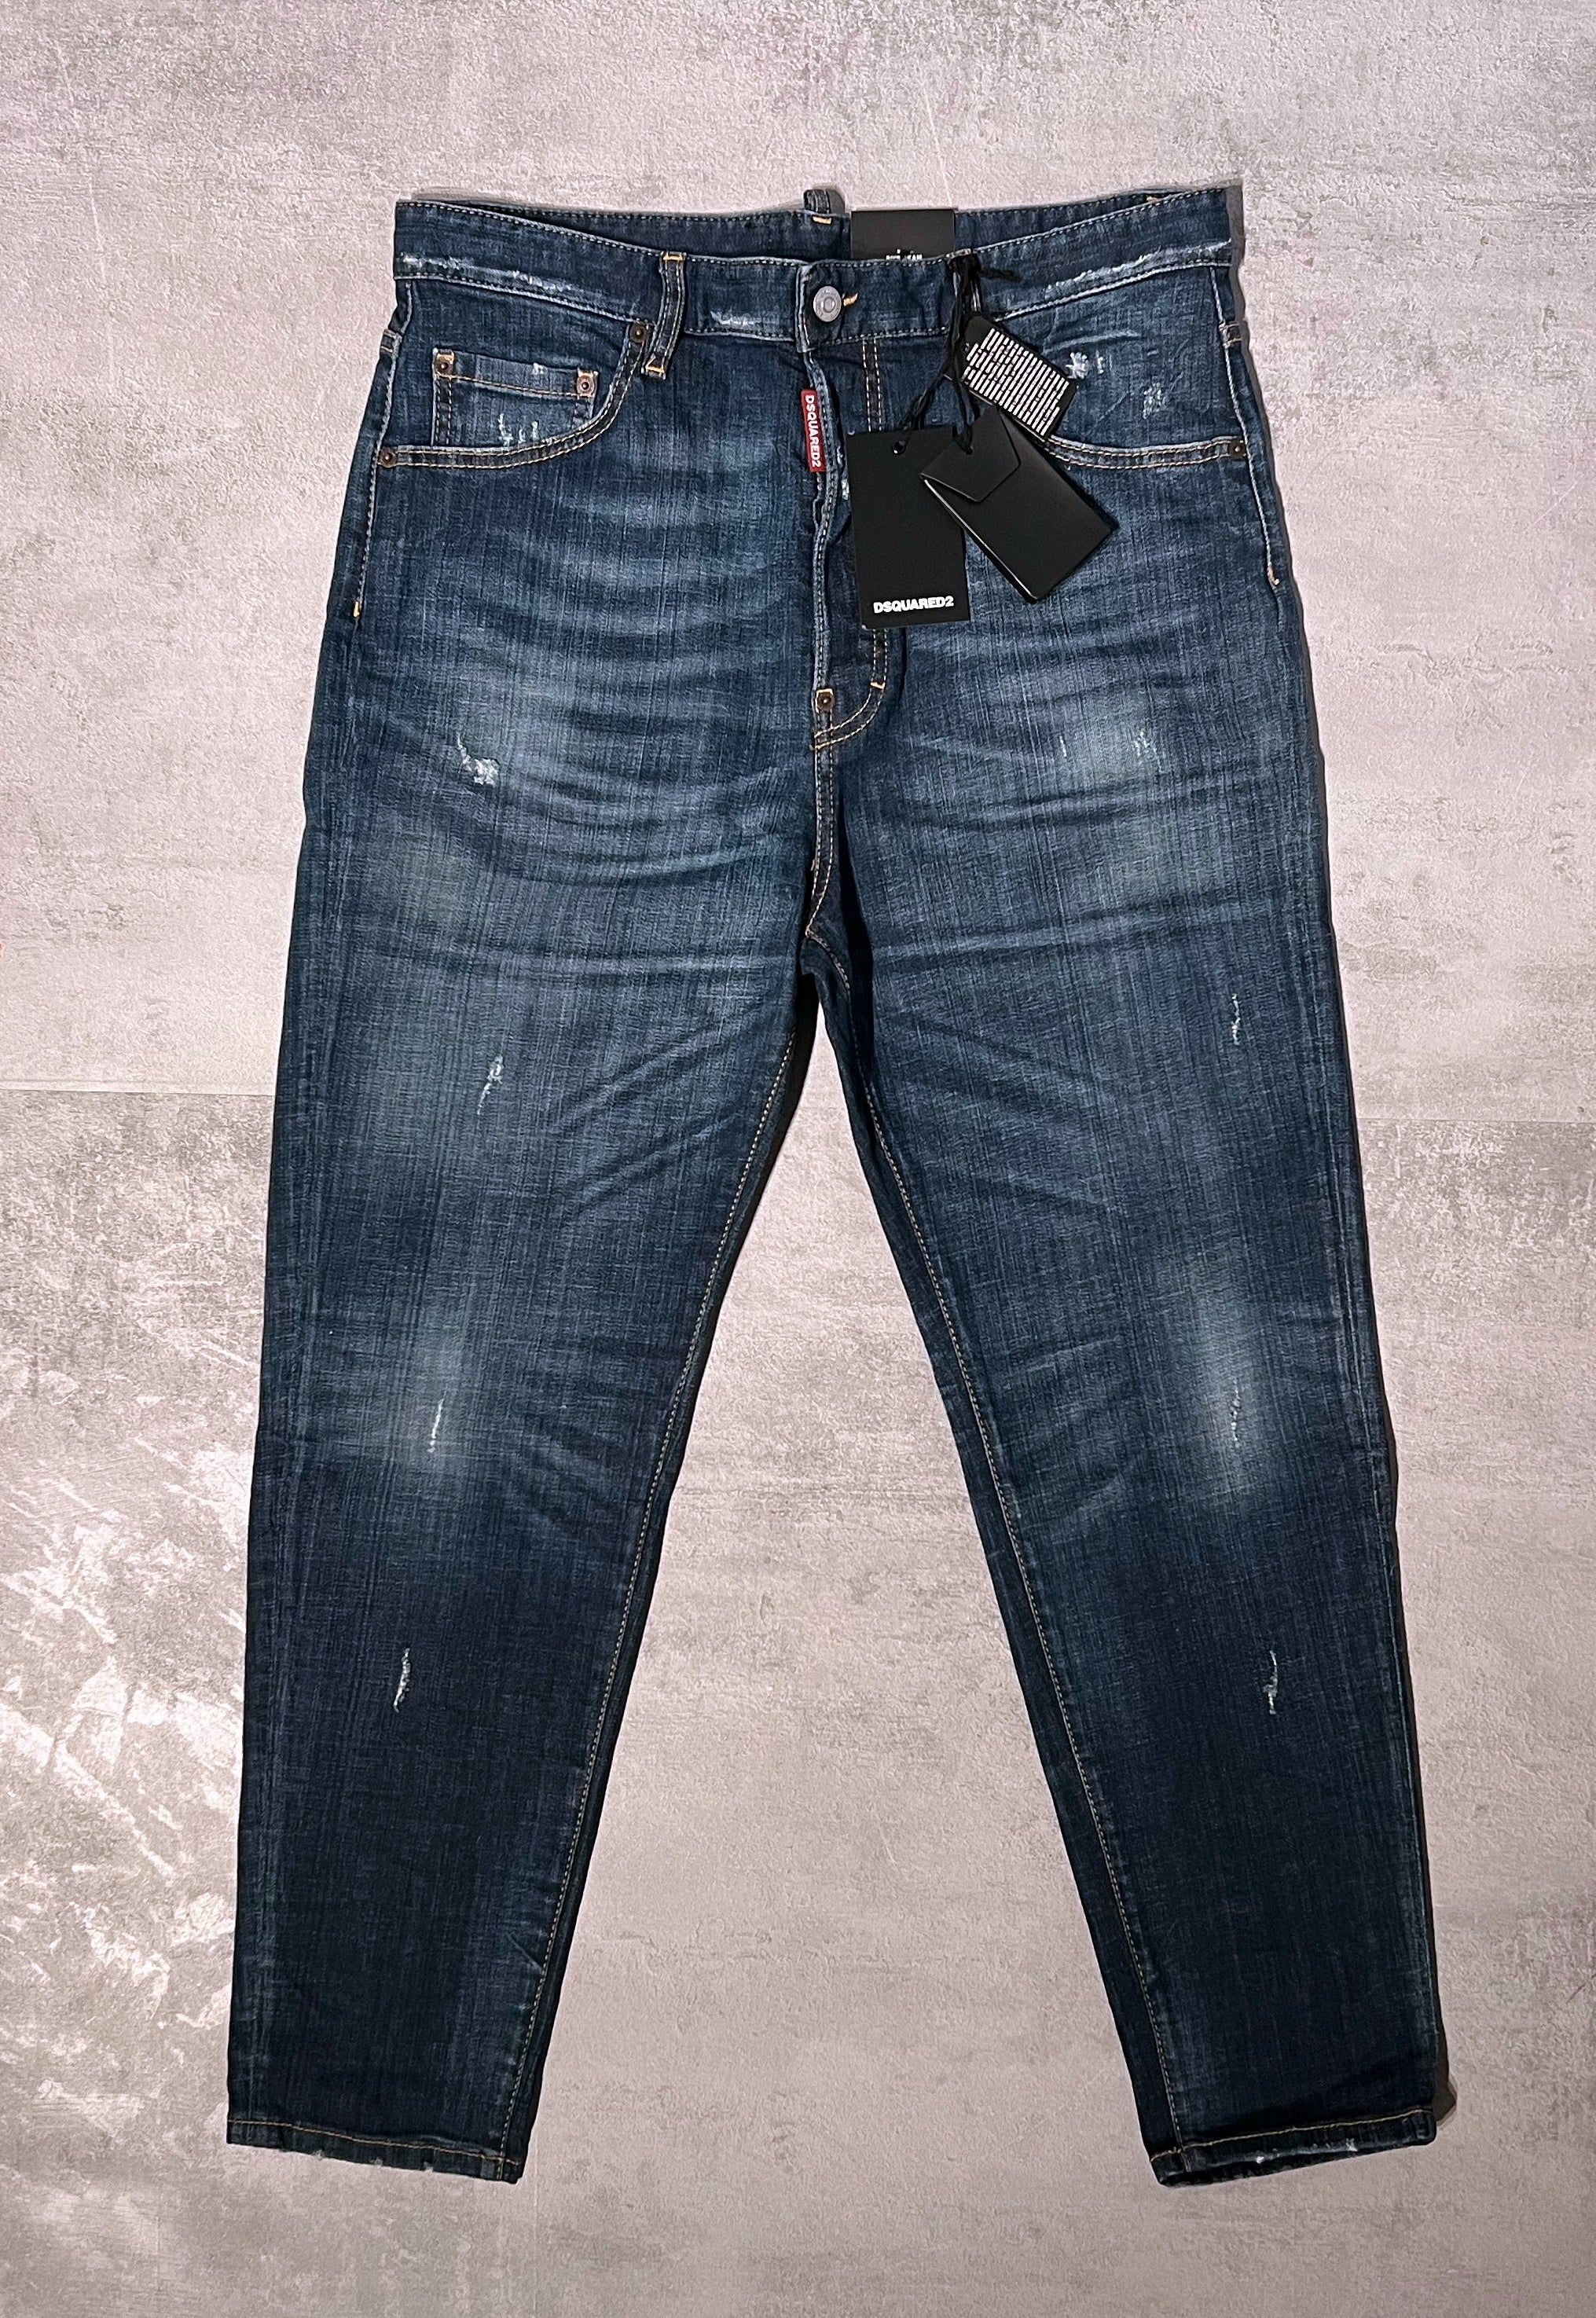 Dsquared2 80’s jeans